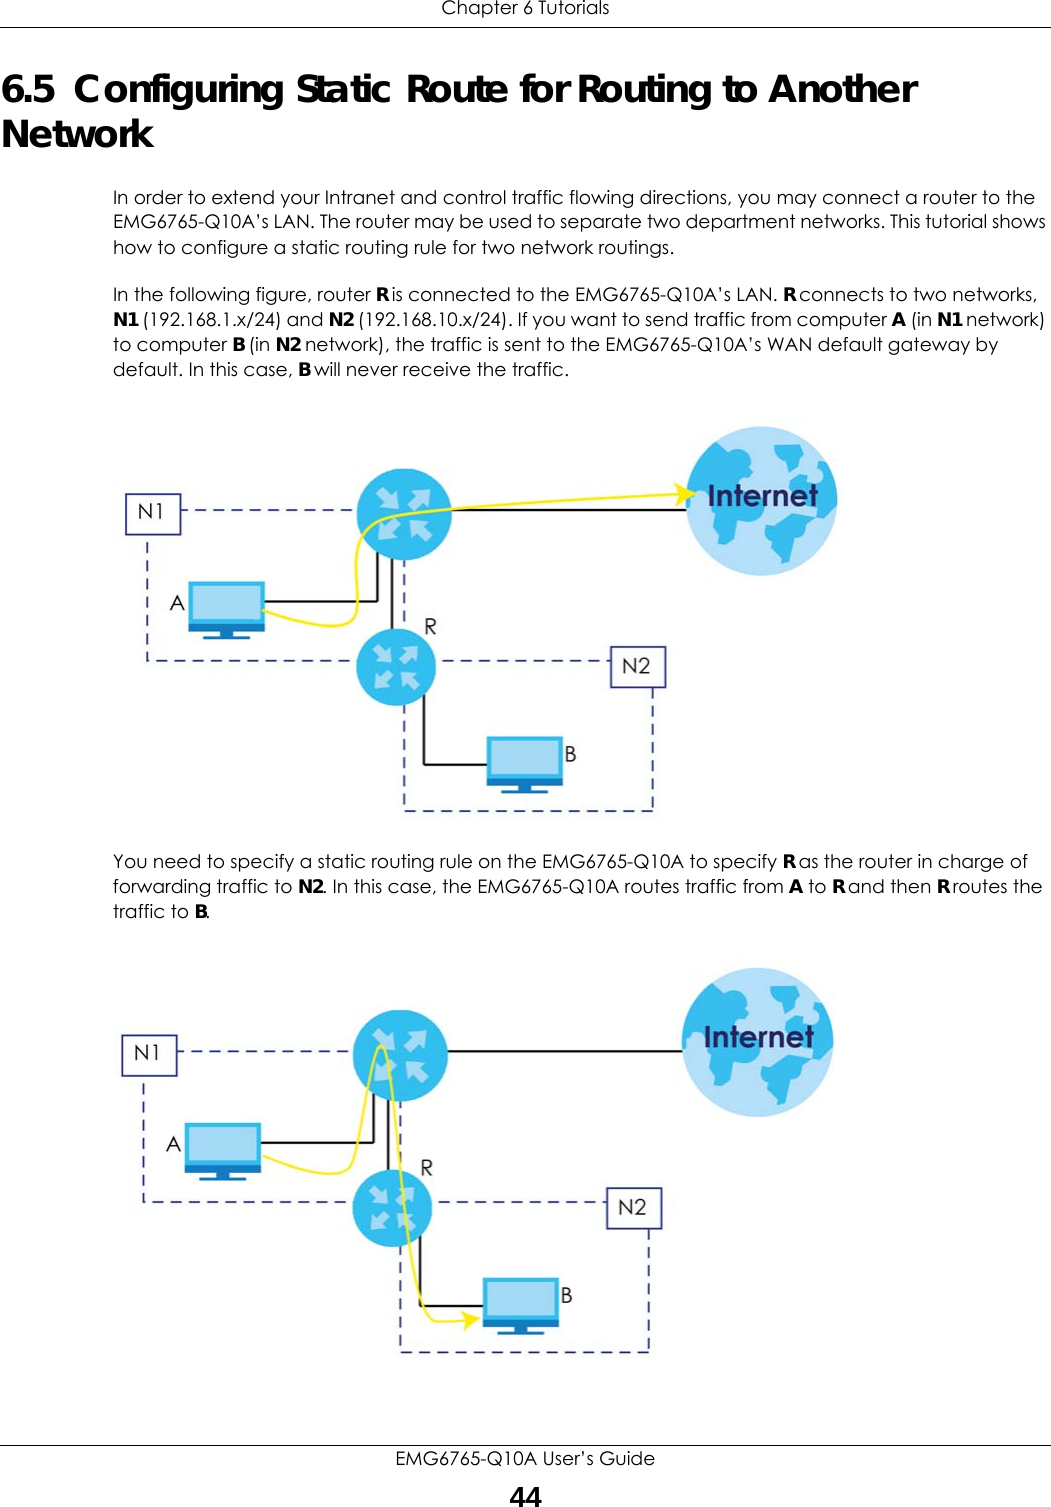 Chapter 6 TutorialsEMG6765-Q10A User’s Guide446.5  Configuring Static Route for Routing to Another NetworkIn order to extend your Intranet and control traffic flowing directions, you may connect a router to the EMG6765-Q10A’s LAN. The router may be used to separate two department networks. This tutorial shows how to configure a static routing rule for two network routings.In the following figure, router R is connected to the EMG6765-Q10A’s LAN. R connects to two networks, N1 (192.168.1.x/24) and N2 (192.168.10.x/24). If you want to send traffic from computer A (in N1 network) to computer B (in N2 network), the traffic is sent to the EMG6765-Q10A’s WAN default gateway by default. In this case, B will never receive the traffic.You need to specify a static routing rule on the EMG6765-Q10A to specify R as the router in charge of forwarding traffic to N2. In this case, the EMG6765-Q10A routes traffic from A to R and then R routes the traffic to B.